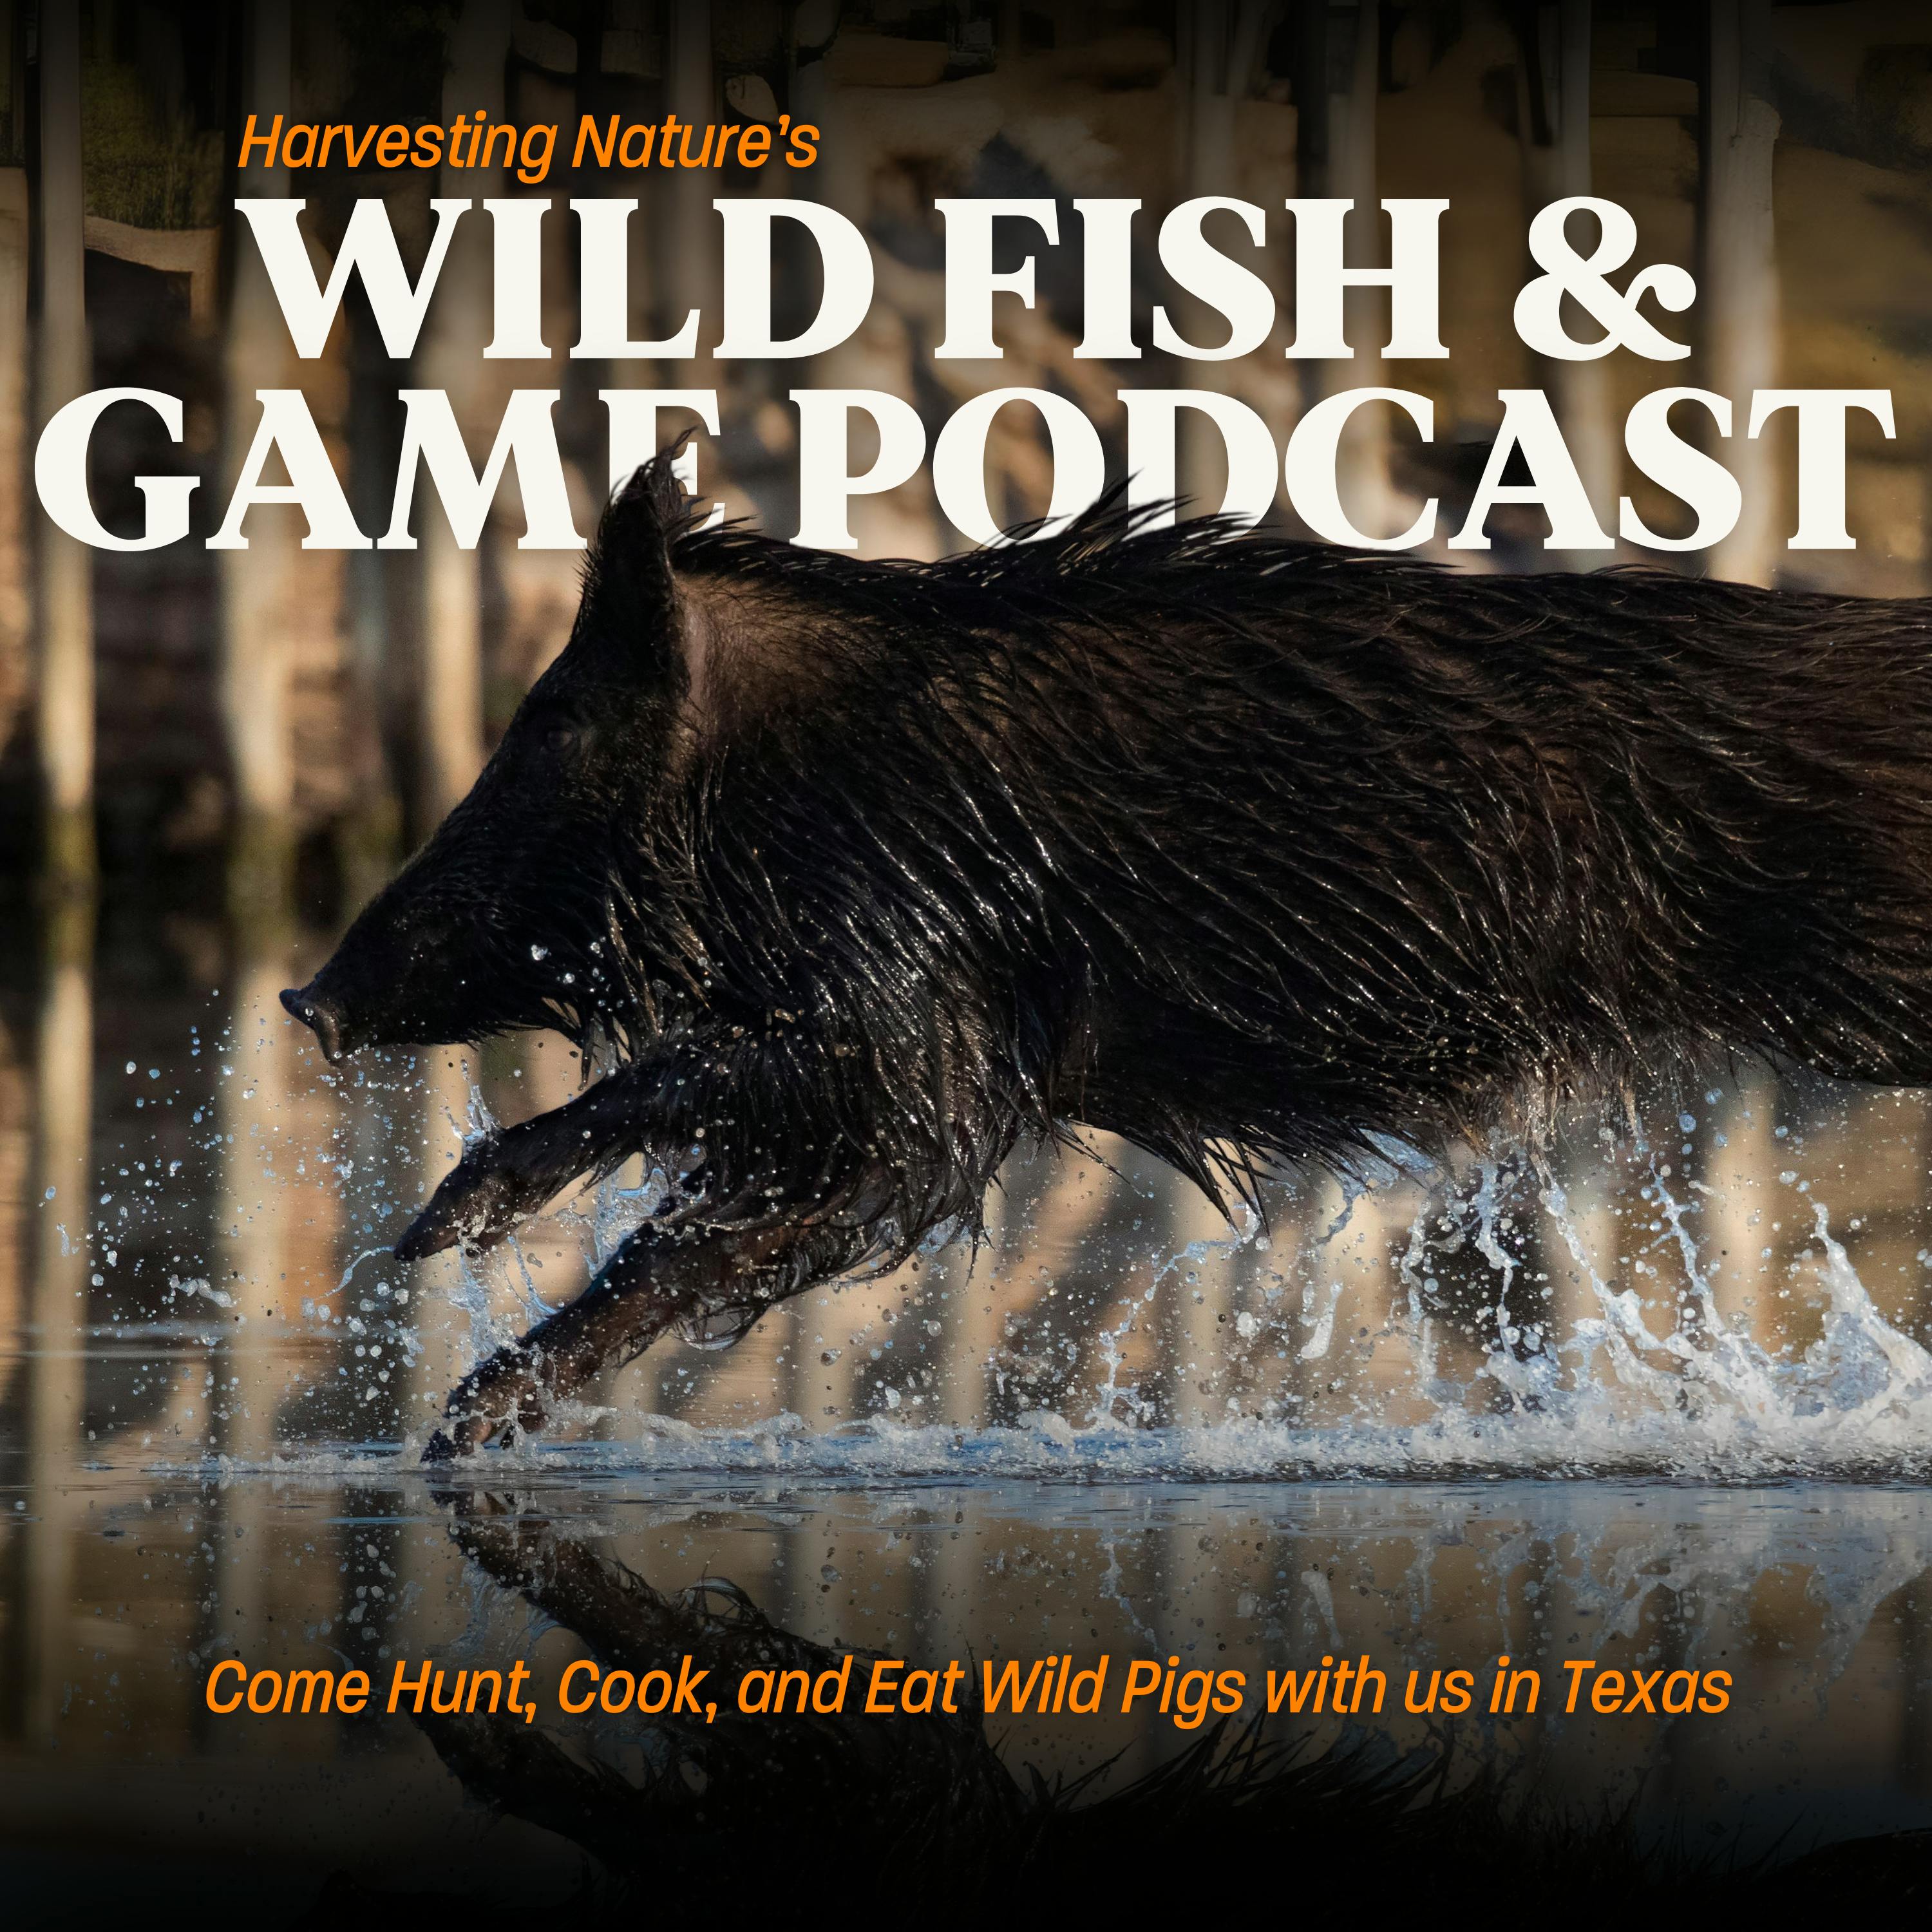 Episode 187: Come Hunt, Cook, and Eat Wild Pigs with us in Texas